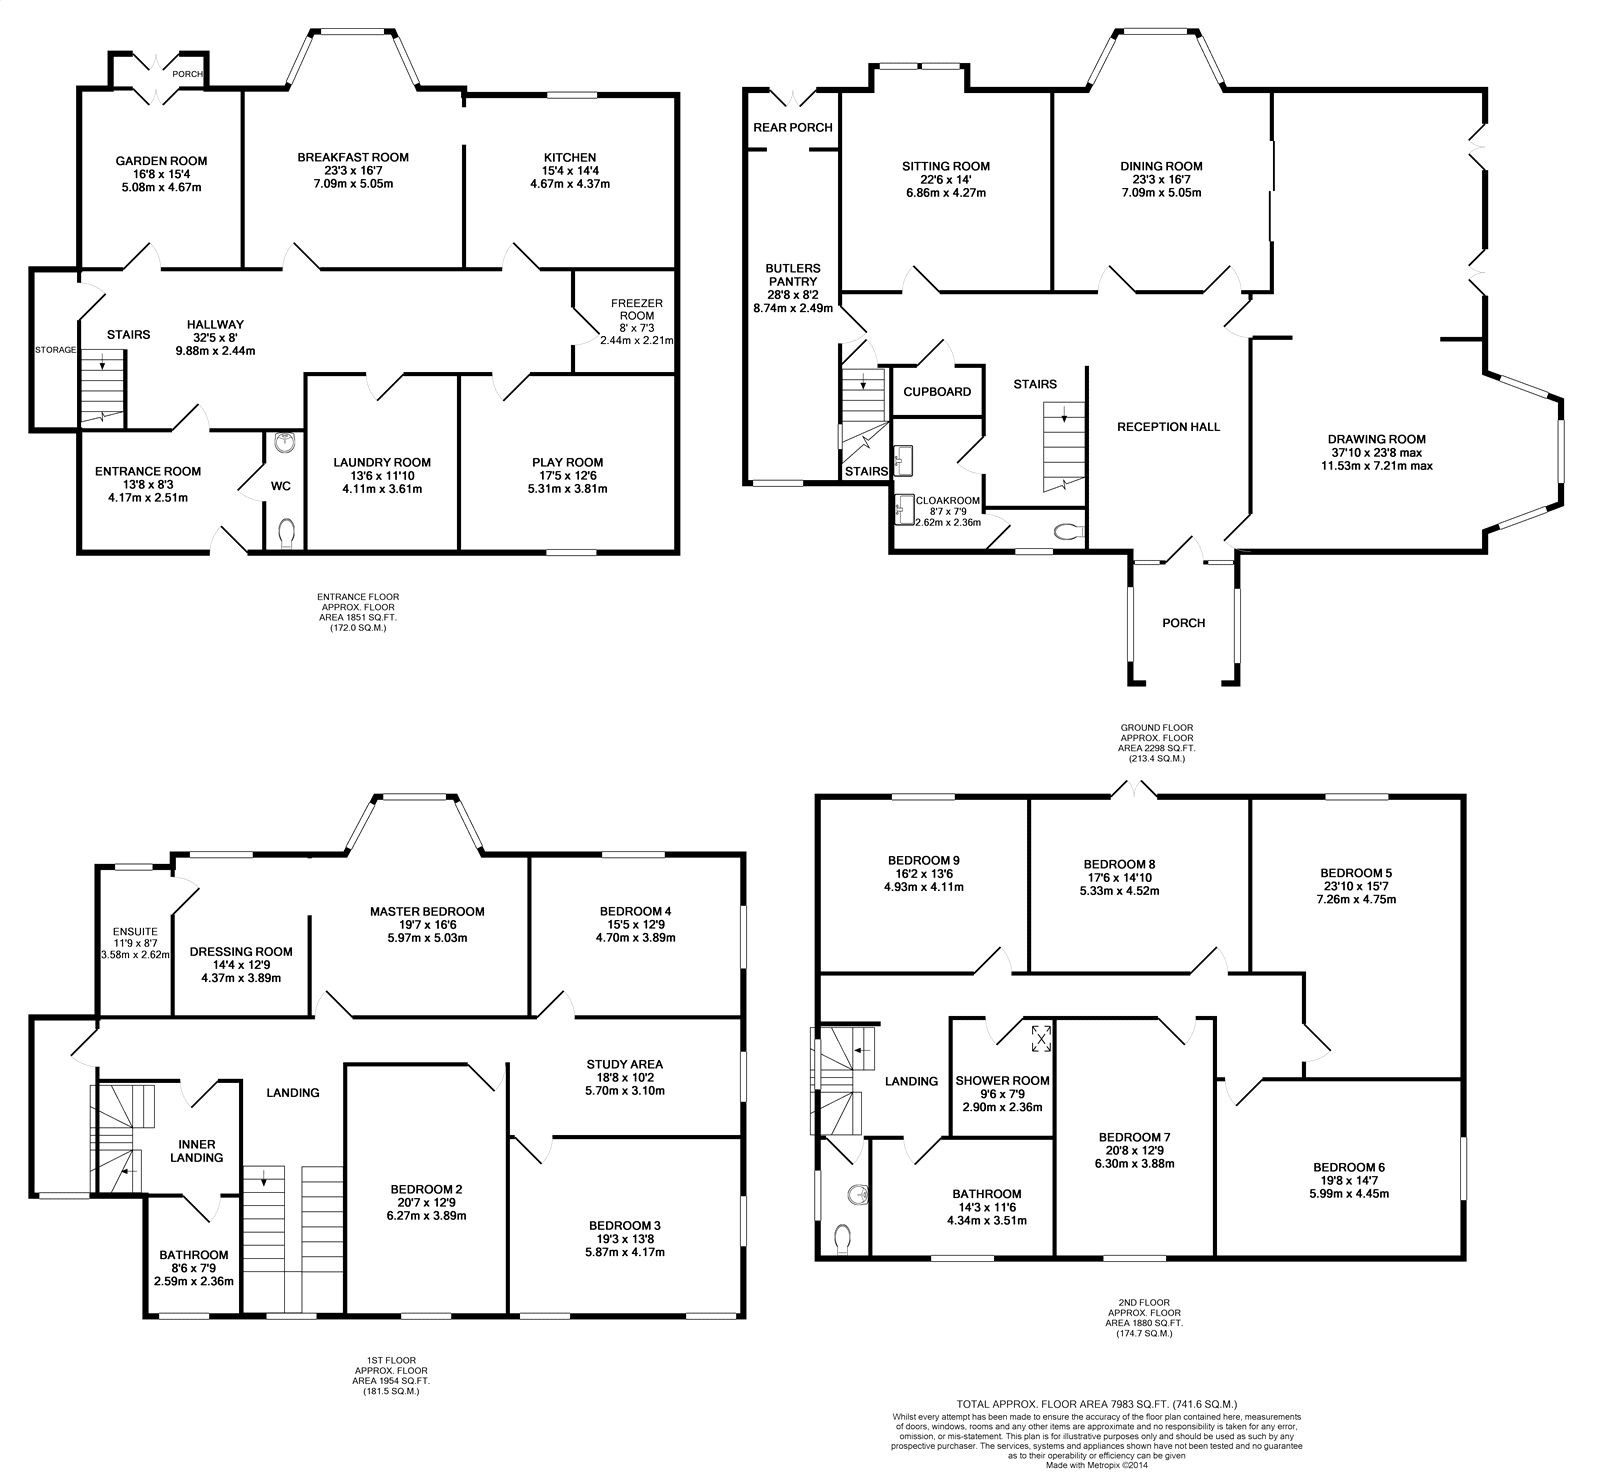 JPEG image - The floorplan of the house: rather large even without the other part of the hall!#